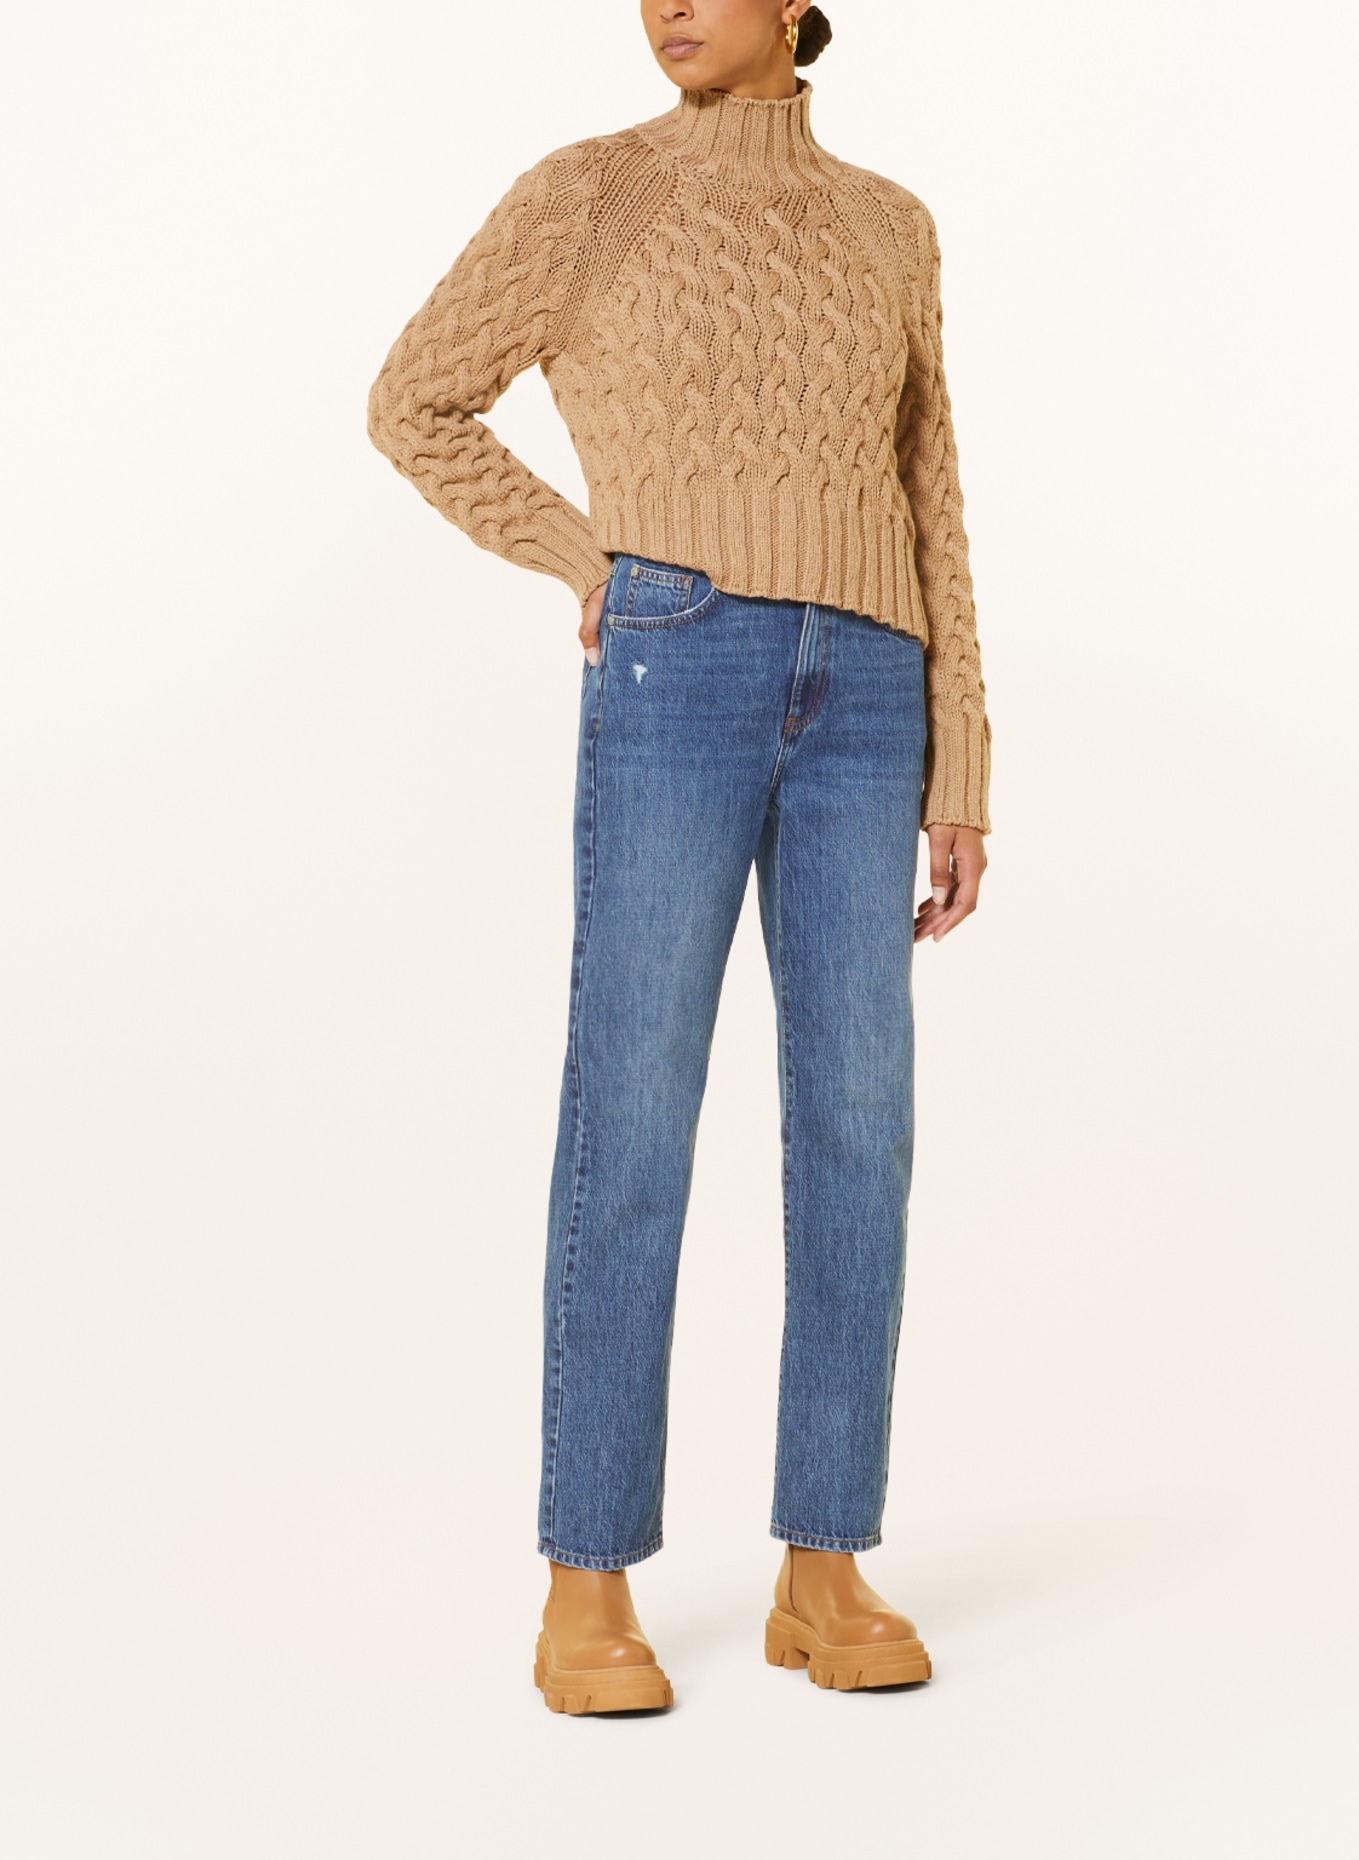 RIANI Sweater made of merino wool, Color: CAMEL (Image 2)